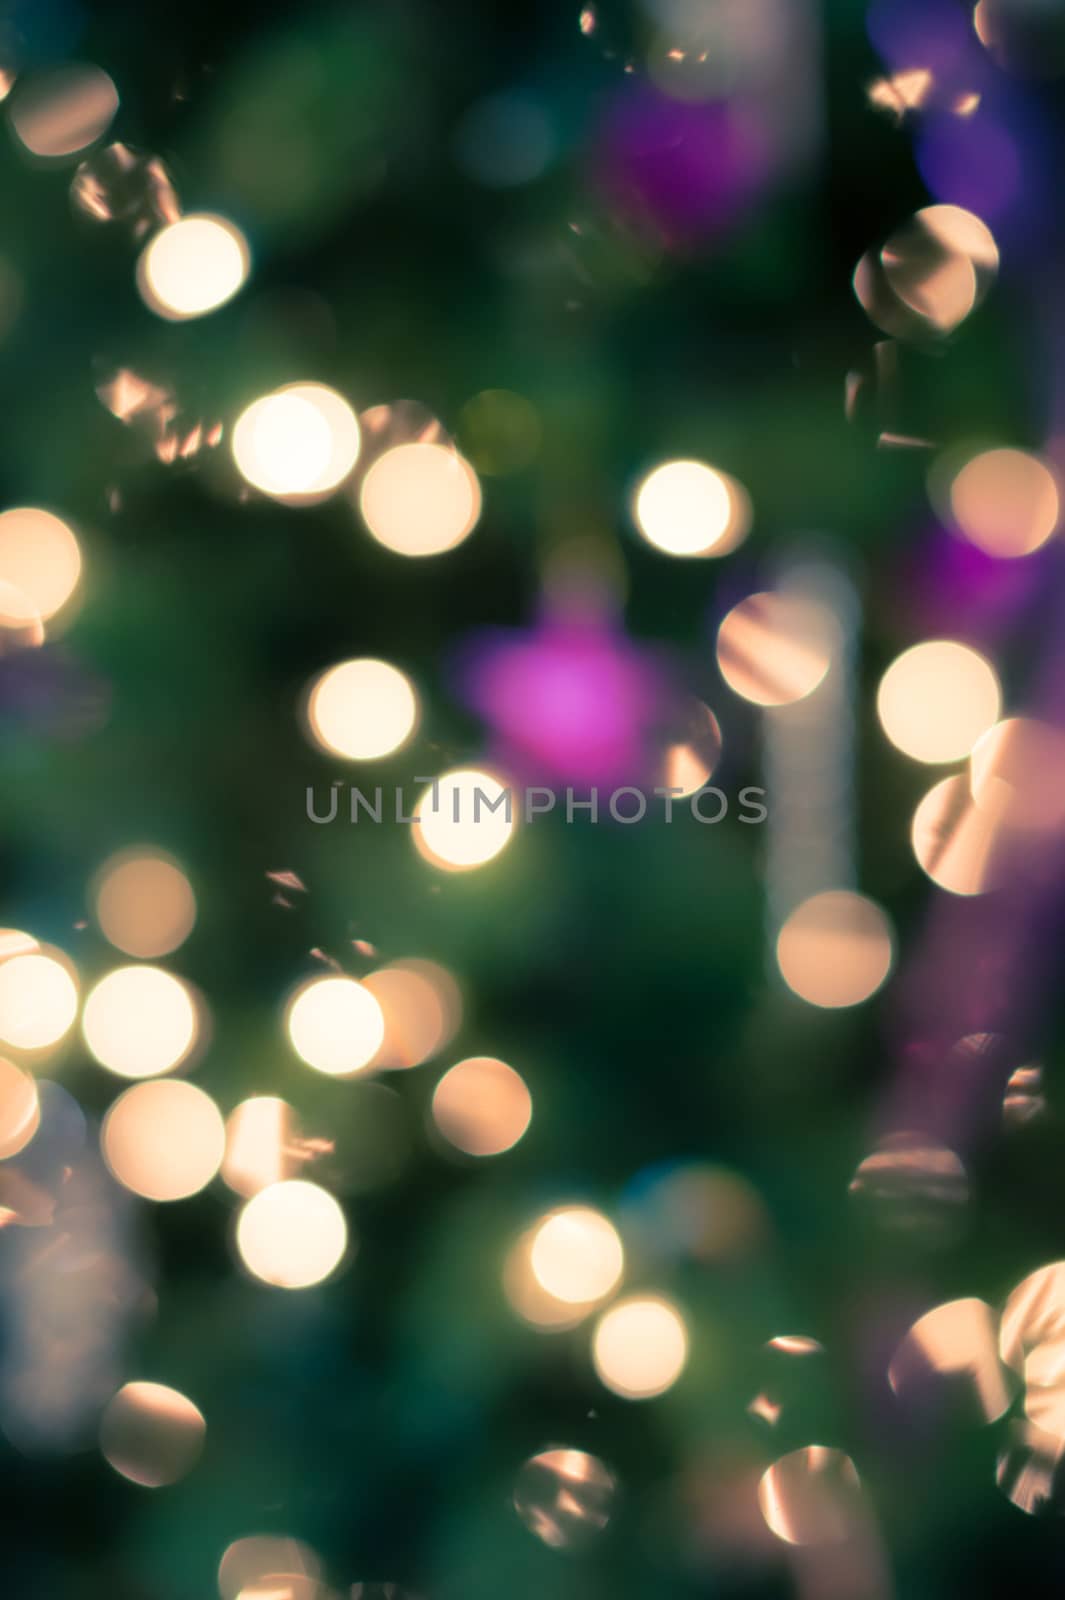 Abstract holiday background with blurred Christmas lights and festive bokeh